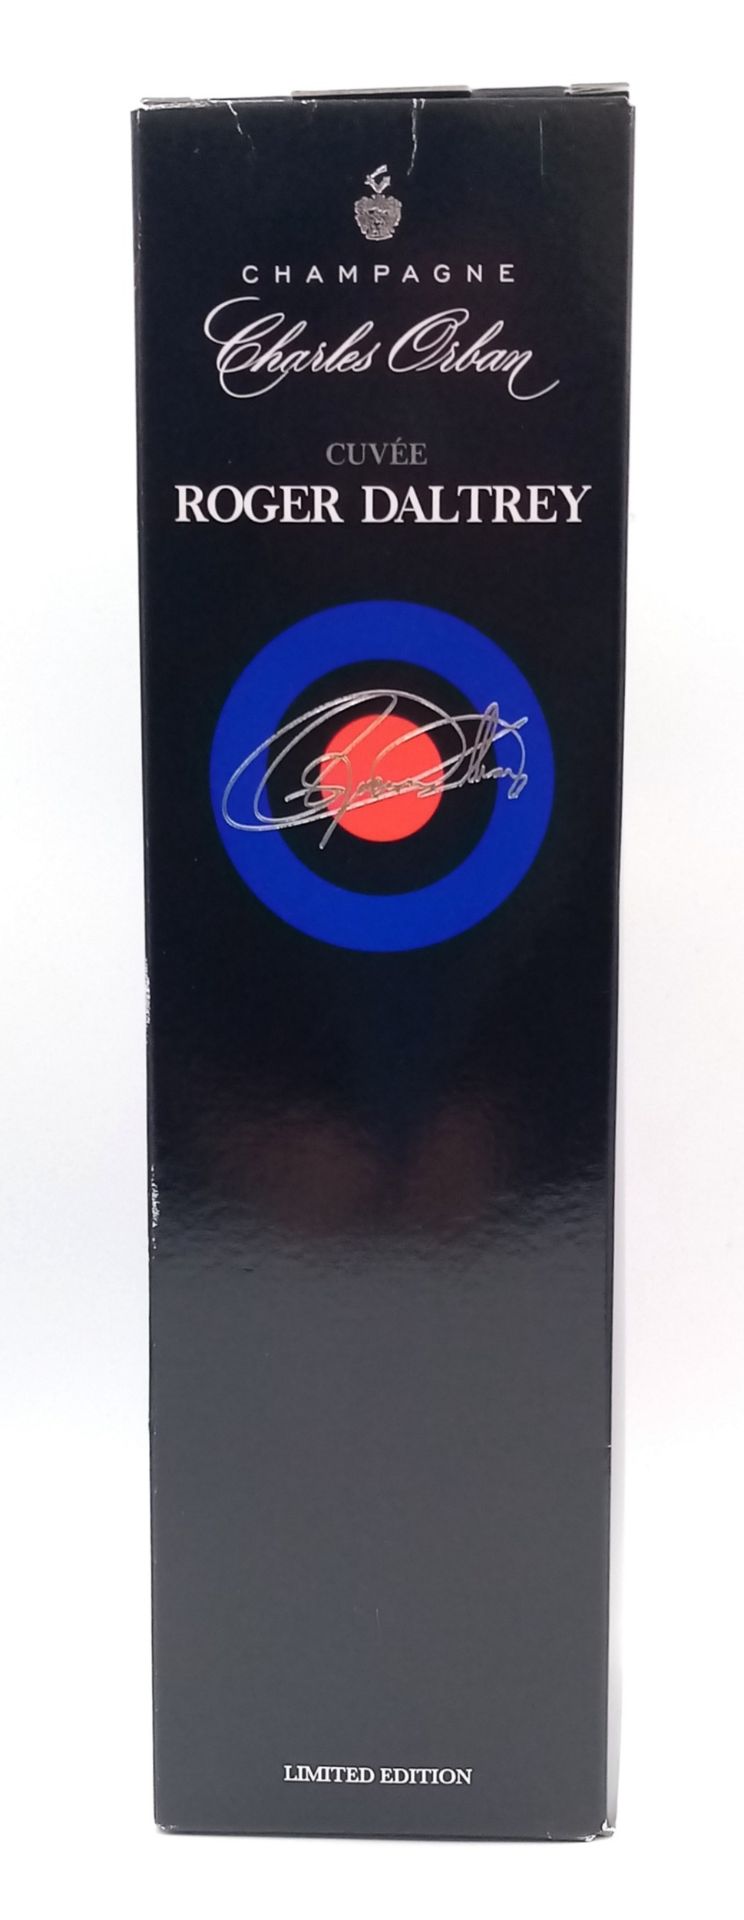 A Limited-Edition Bottle of Vintage ‘Roger Daltrey’ Charles Orban Champagne. Created to Celebrate 50 - Image 2 of 6